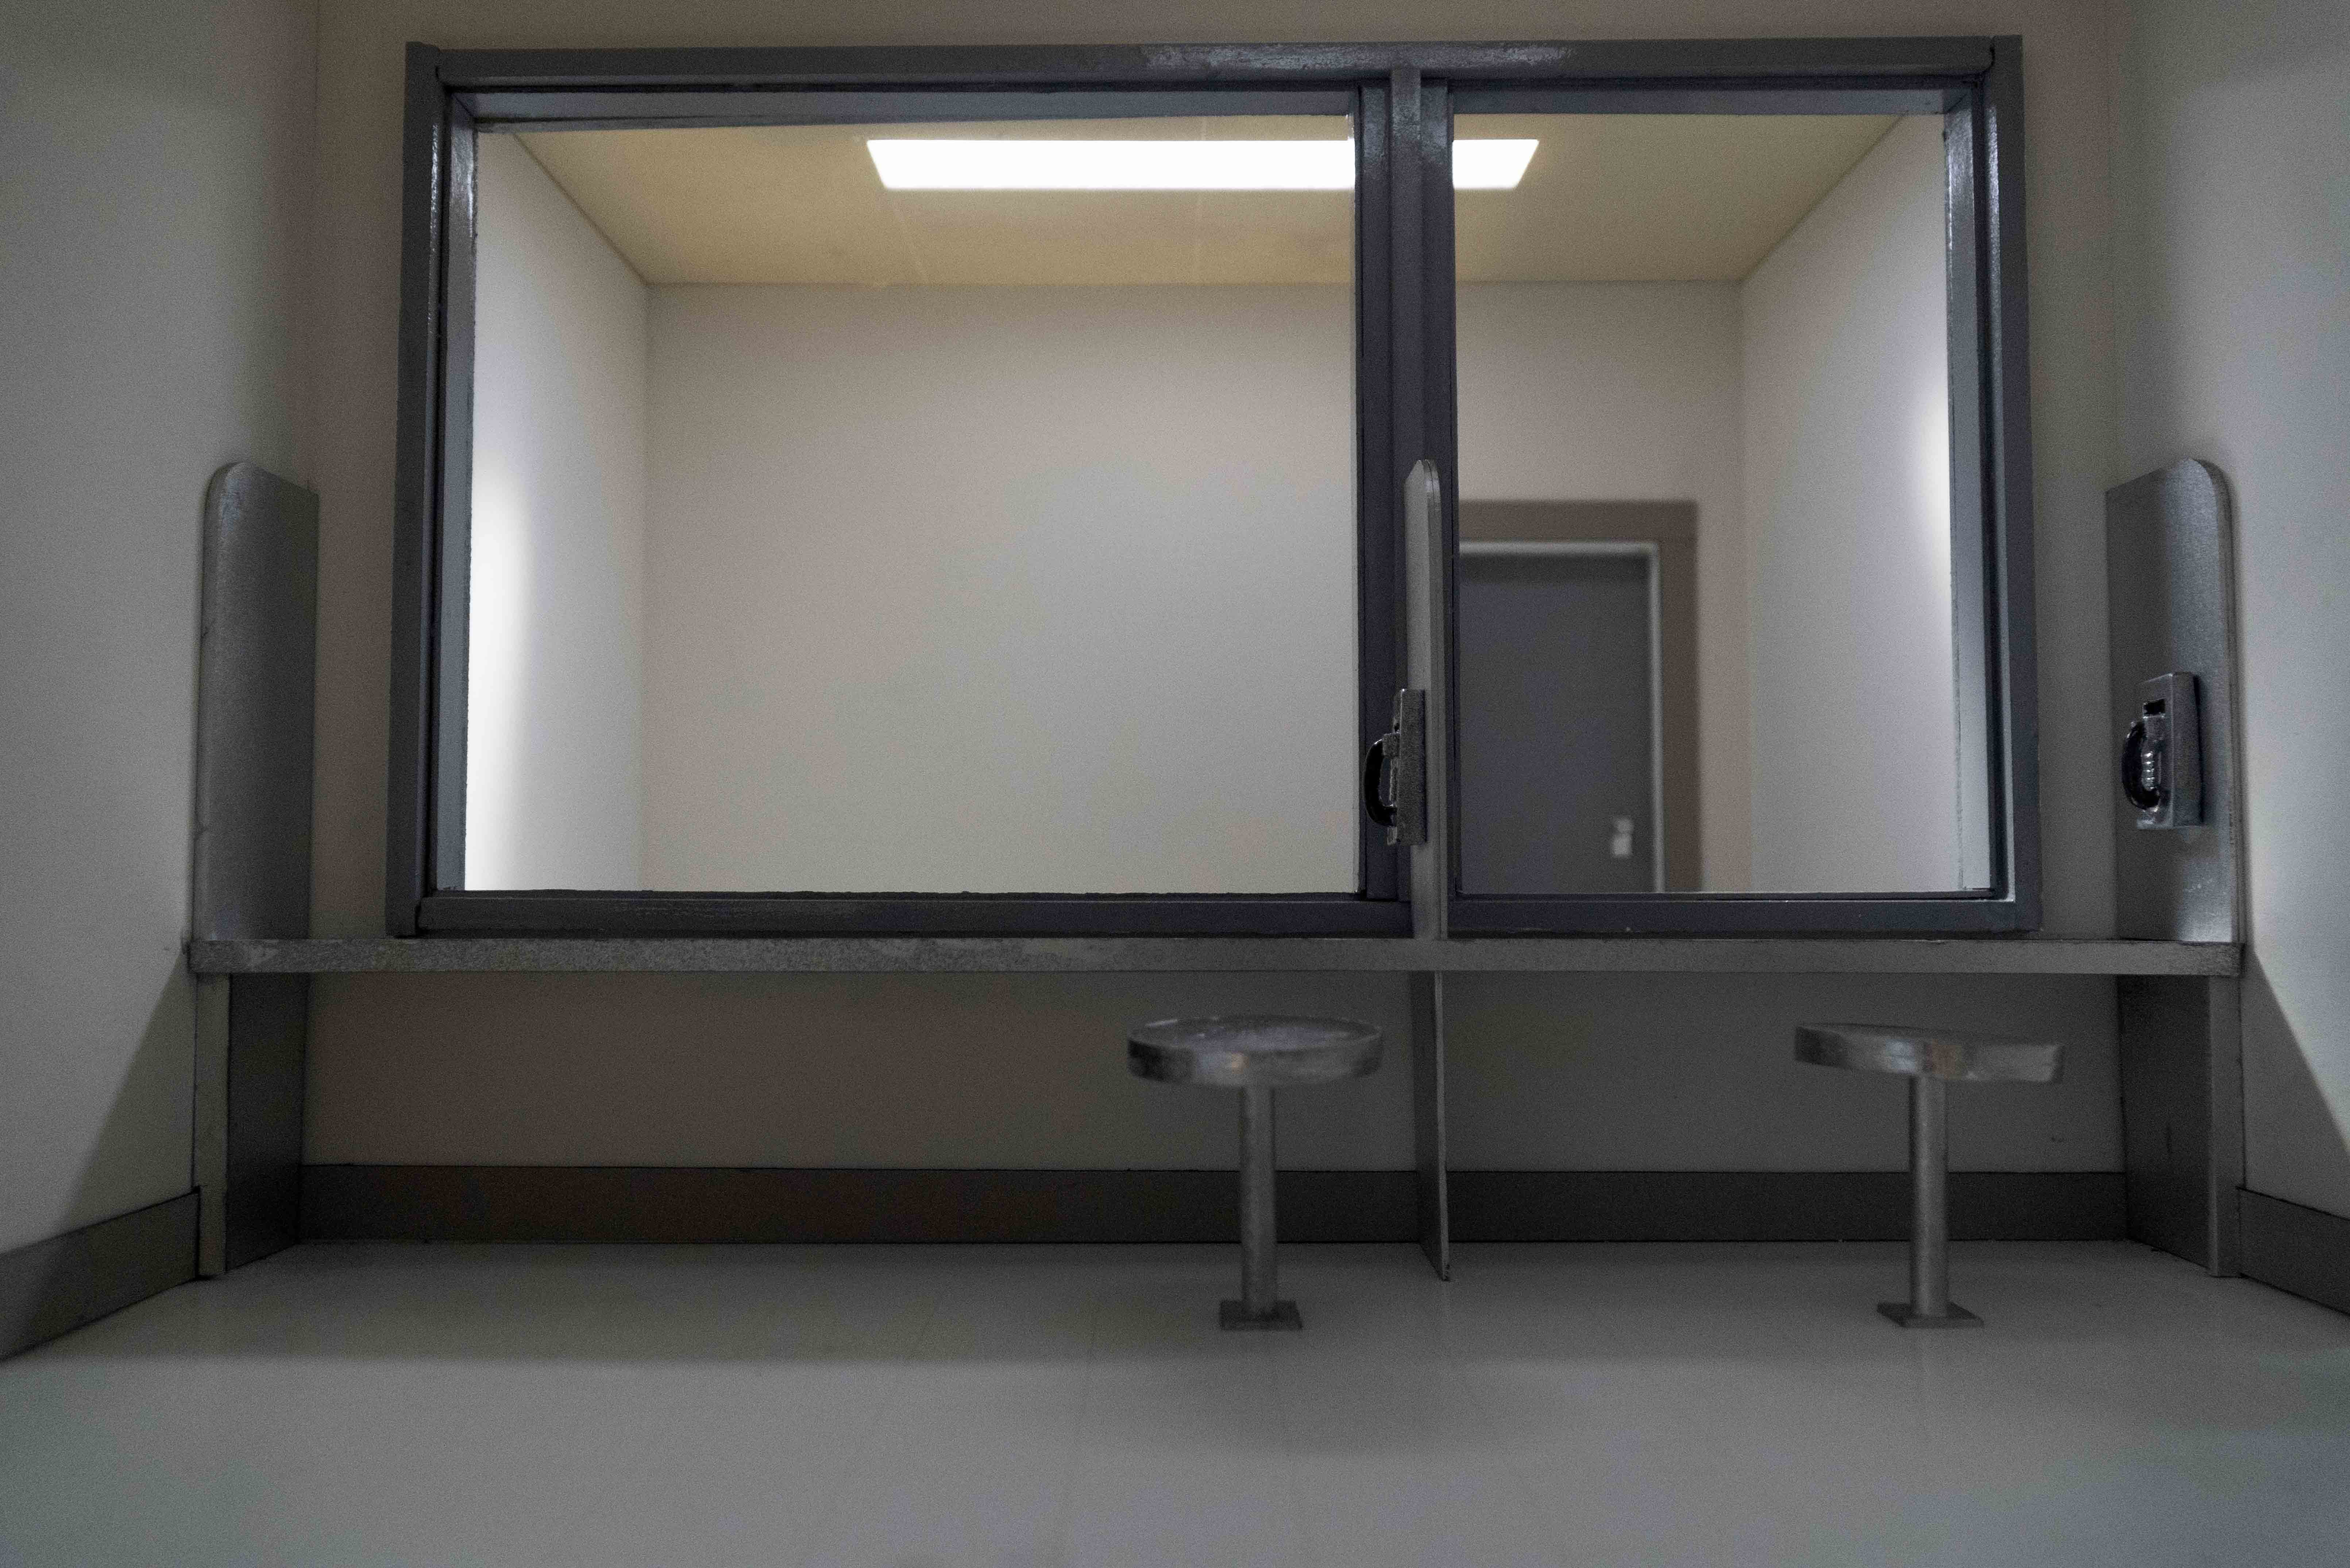 A still of a video that shows a visitation room that appears to be within a prison or other carceral space. The no-contact visitation room is a model reconstruction of the Laval Immigration Detention Centre in Laval Quebec.